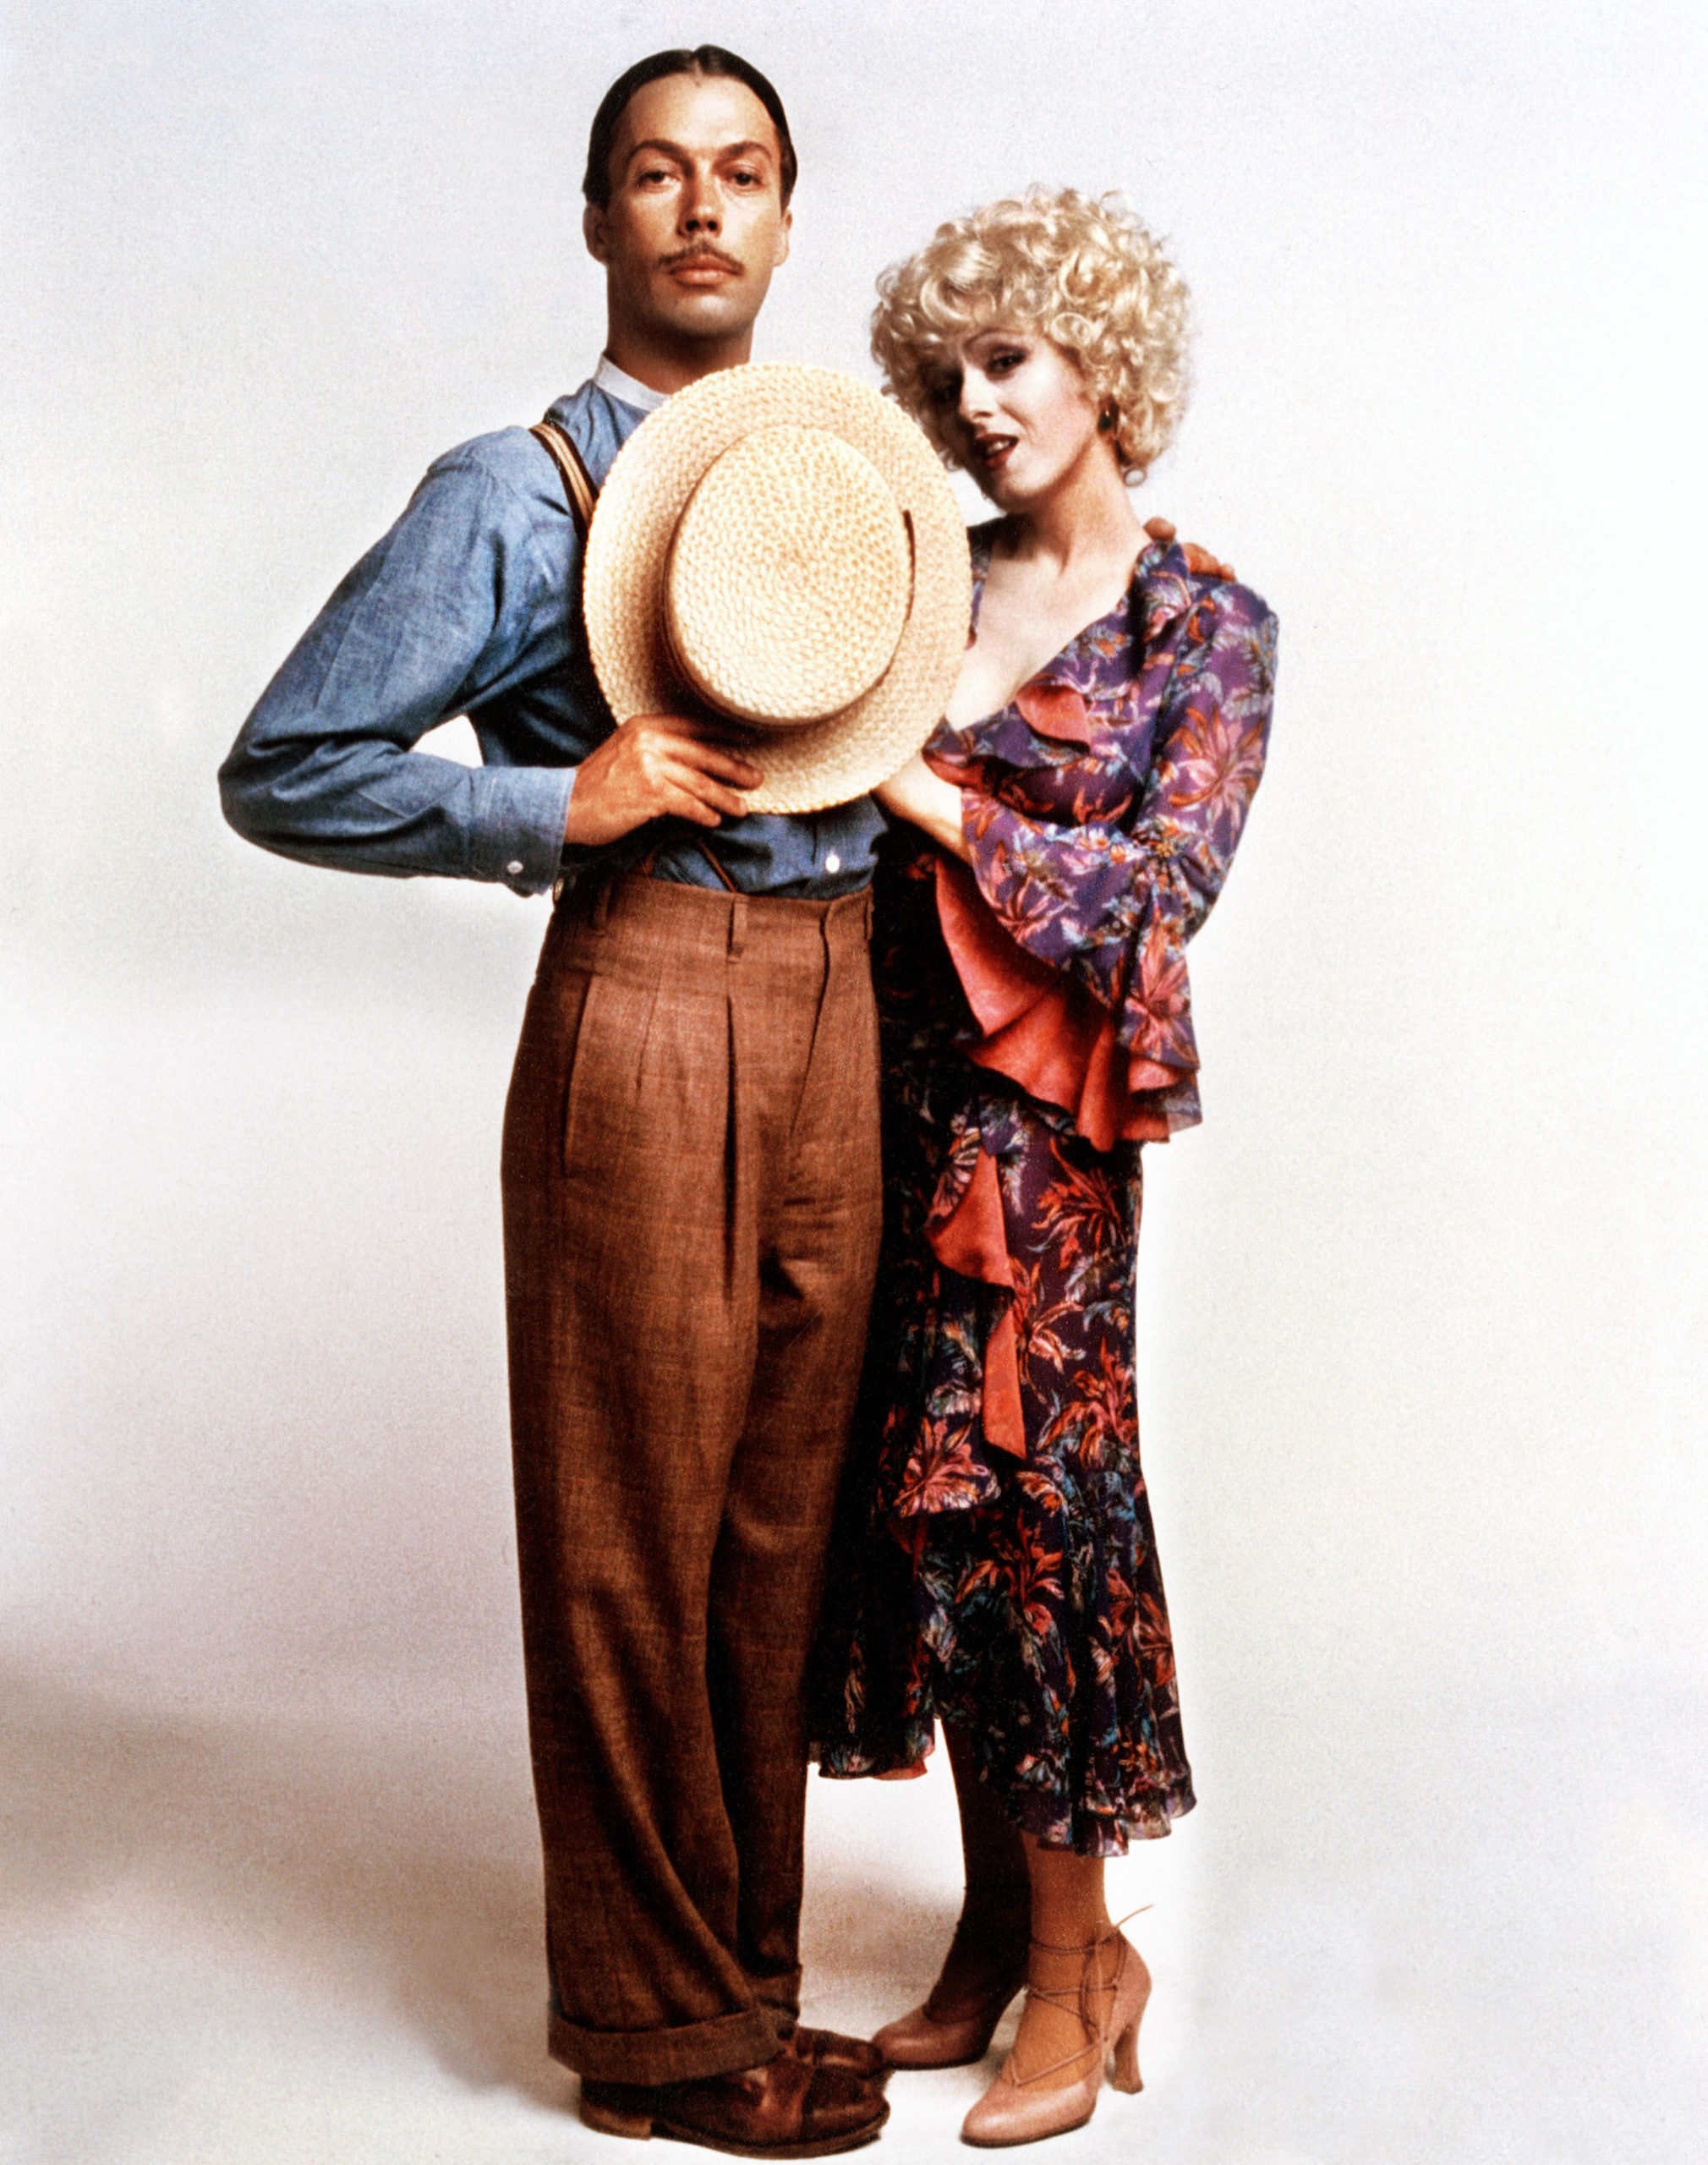 Tim Curry as Rooster, Bernadette Peters as Lily St. Regis in 'Annie' 1982